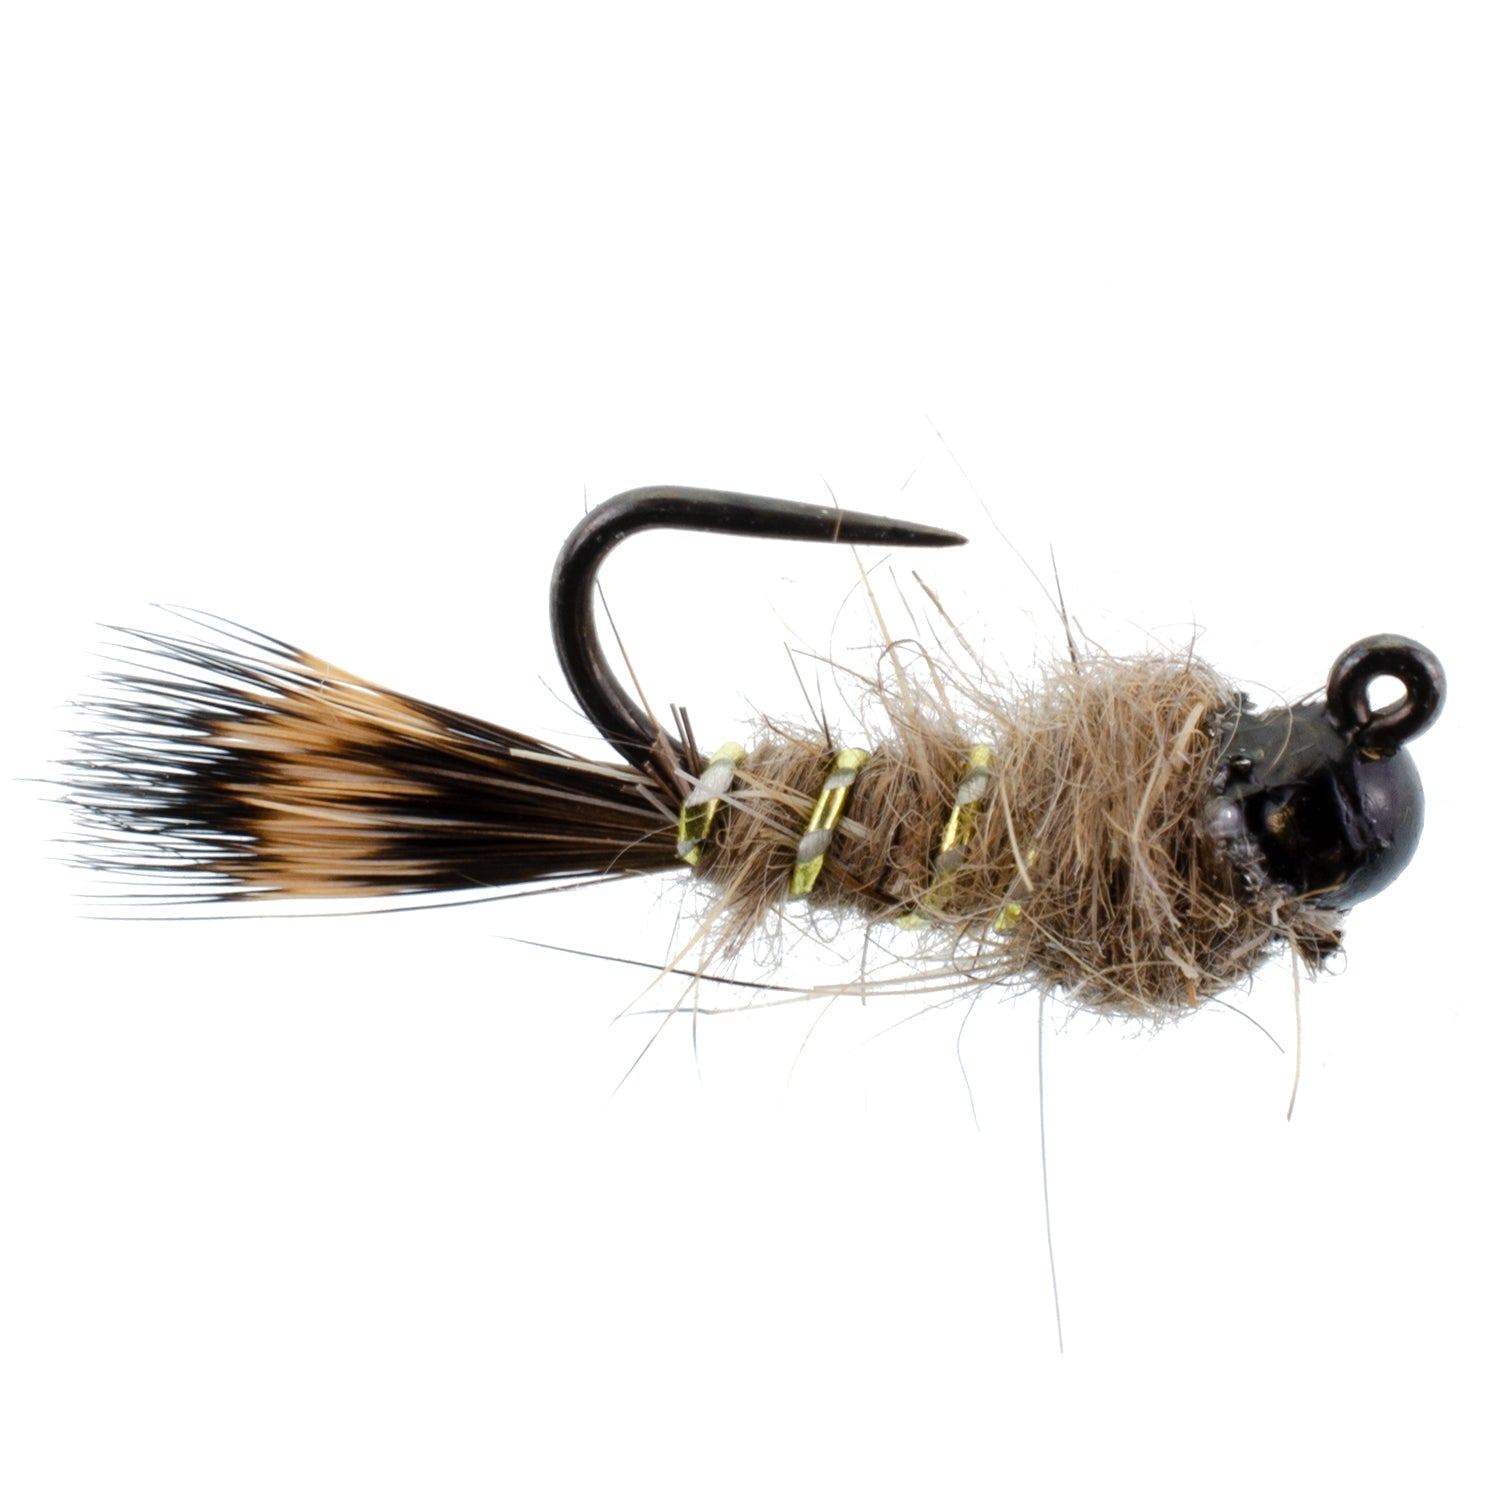 Black Tungsten Bead Tactical Hares Ear Czech Nymph Euro Nymphing Fly - 6 Flies Size 12